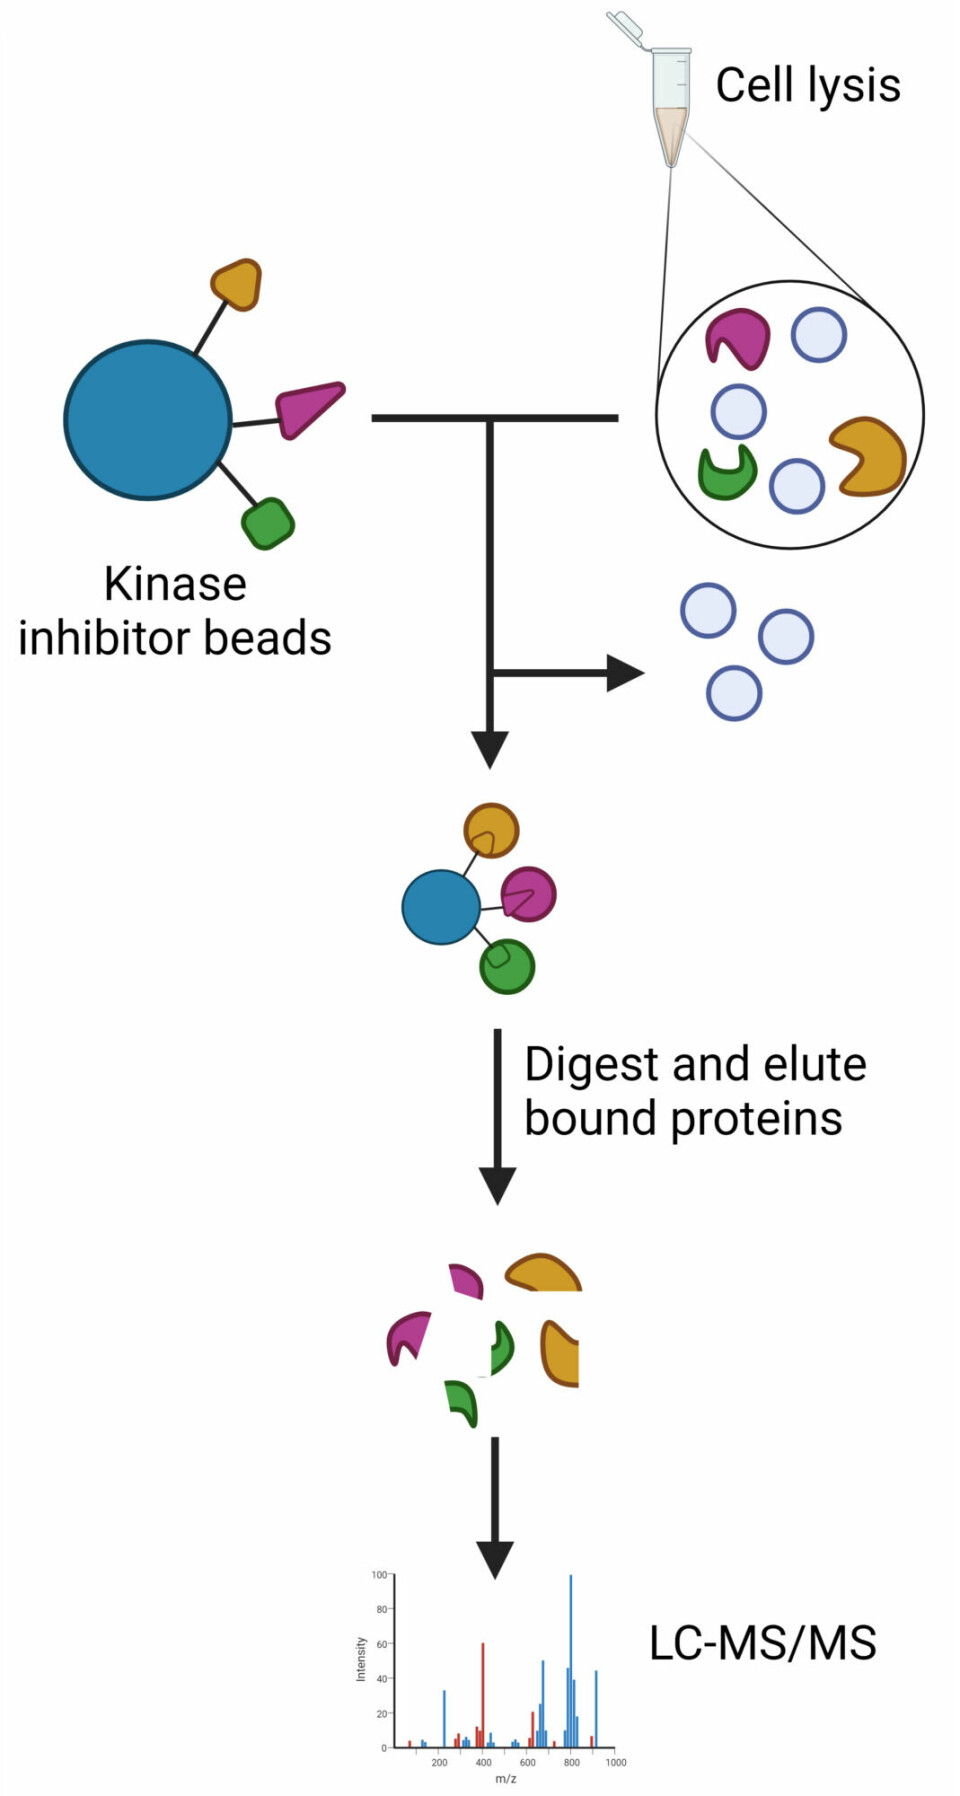 By comparing cell lysis from untreated and treated bacteria, it is possible to see which proteins have changed. The cell lysis contains ‘traffic light proteins’, i.e. proteins involved in various bacterial signalling pathways. By using beads coupled to kinase inhibitors, activated proteins can be selected for via an available ATP-binding site (green traffic light). This provides insight into which cellular processes are active or deactivated, and thus provides valuable information about a cell’s response to antibiotics.